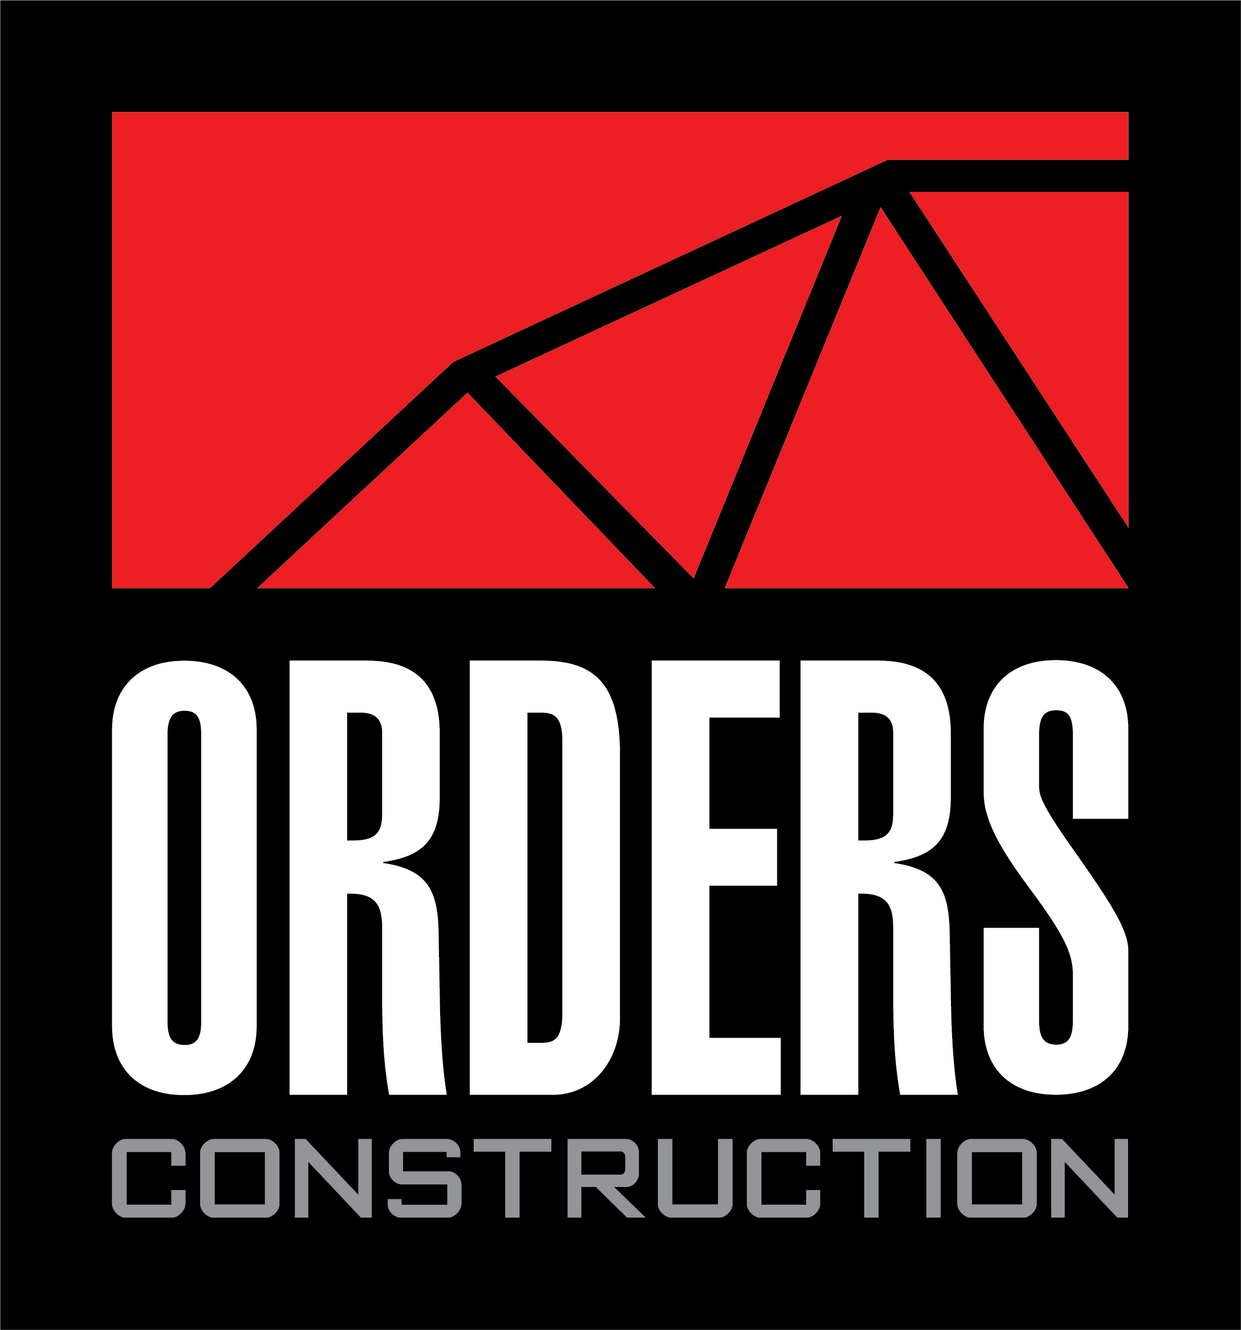 Orders Construction